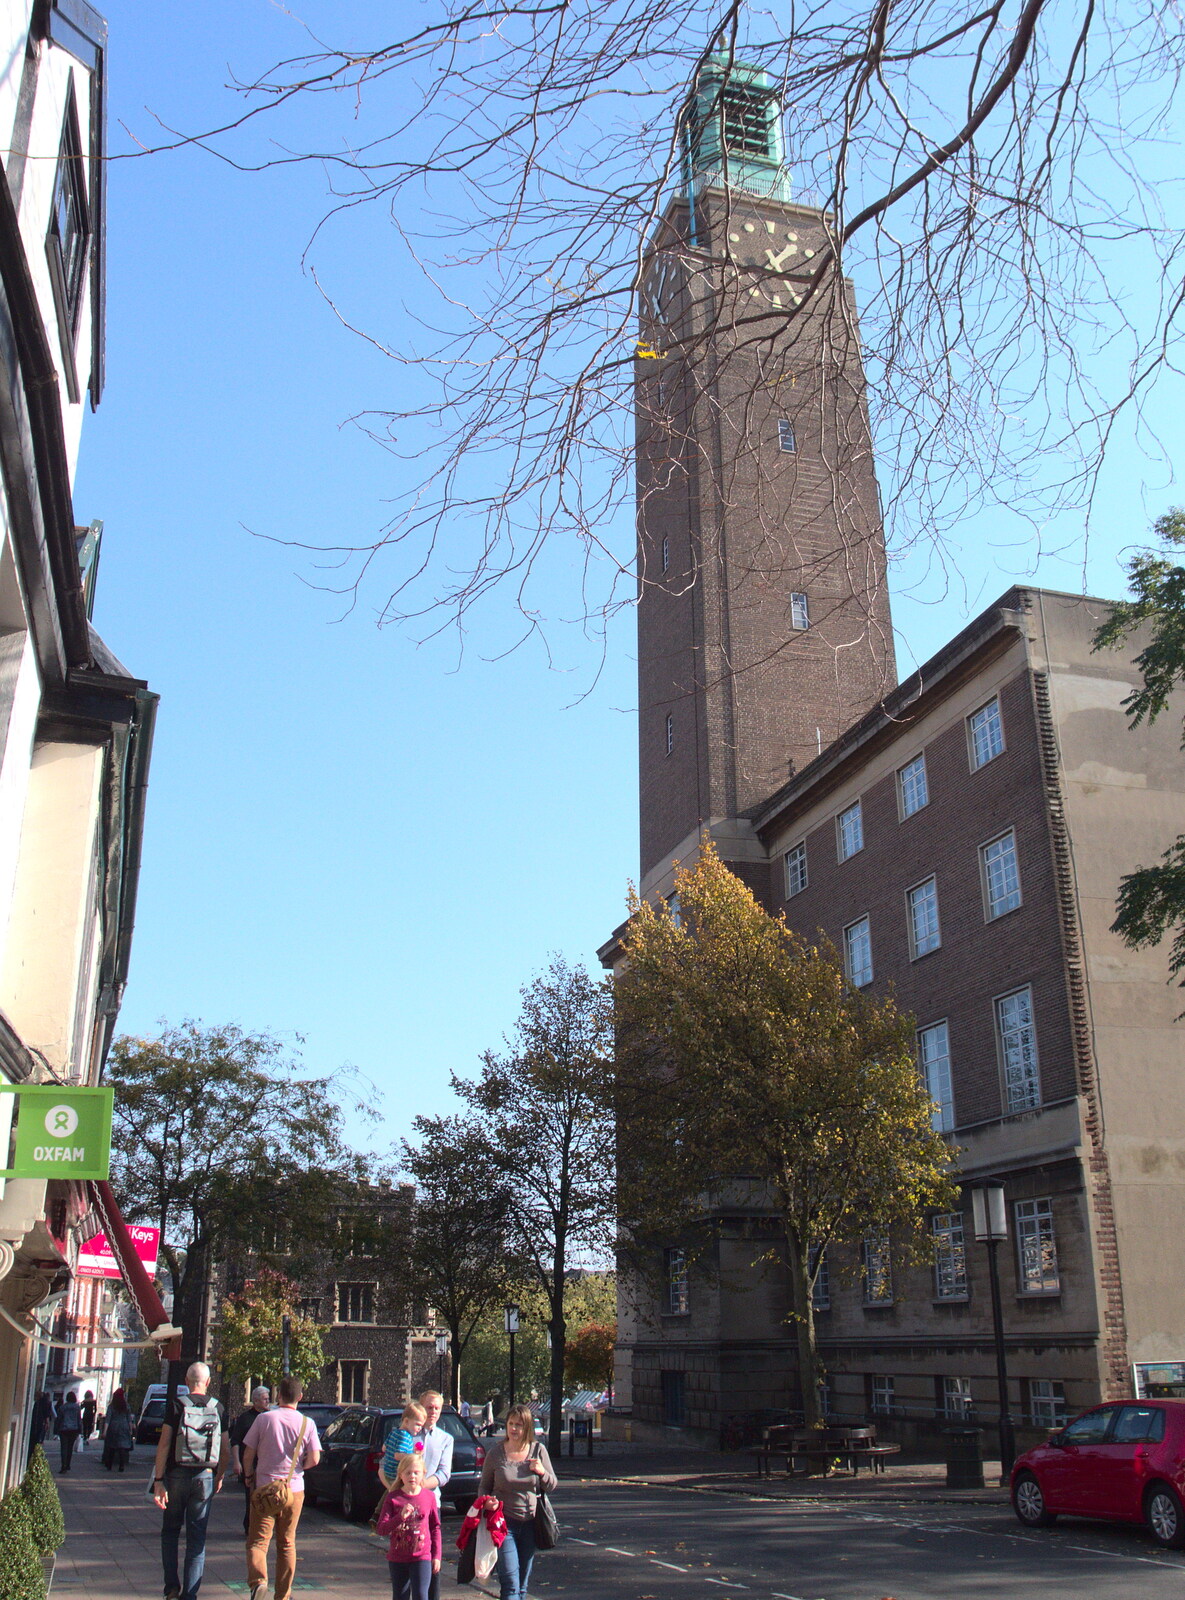 Norwich's City Hall clock tower from Trafalgar Day and Pizza, Norwich, Norfolk - 15th October 2017